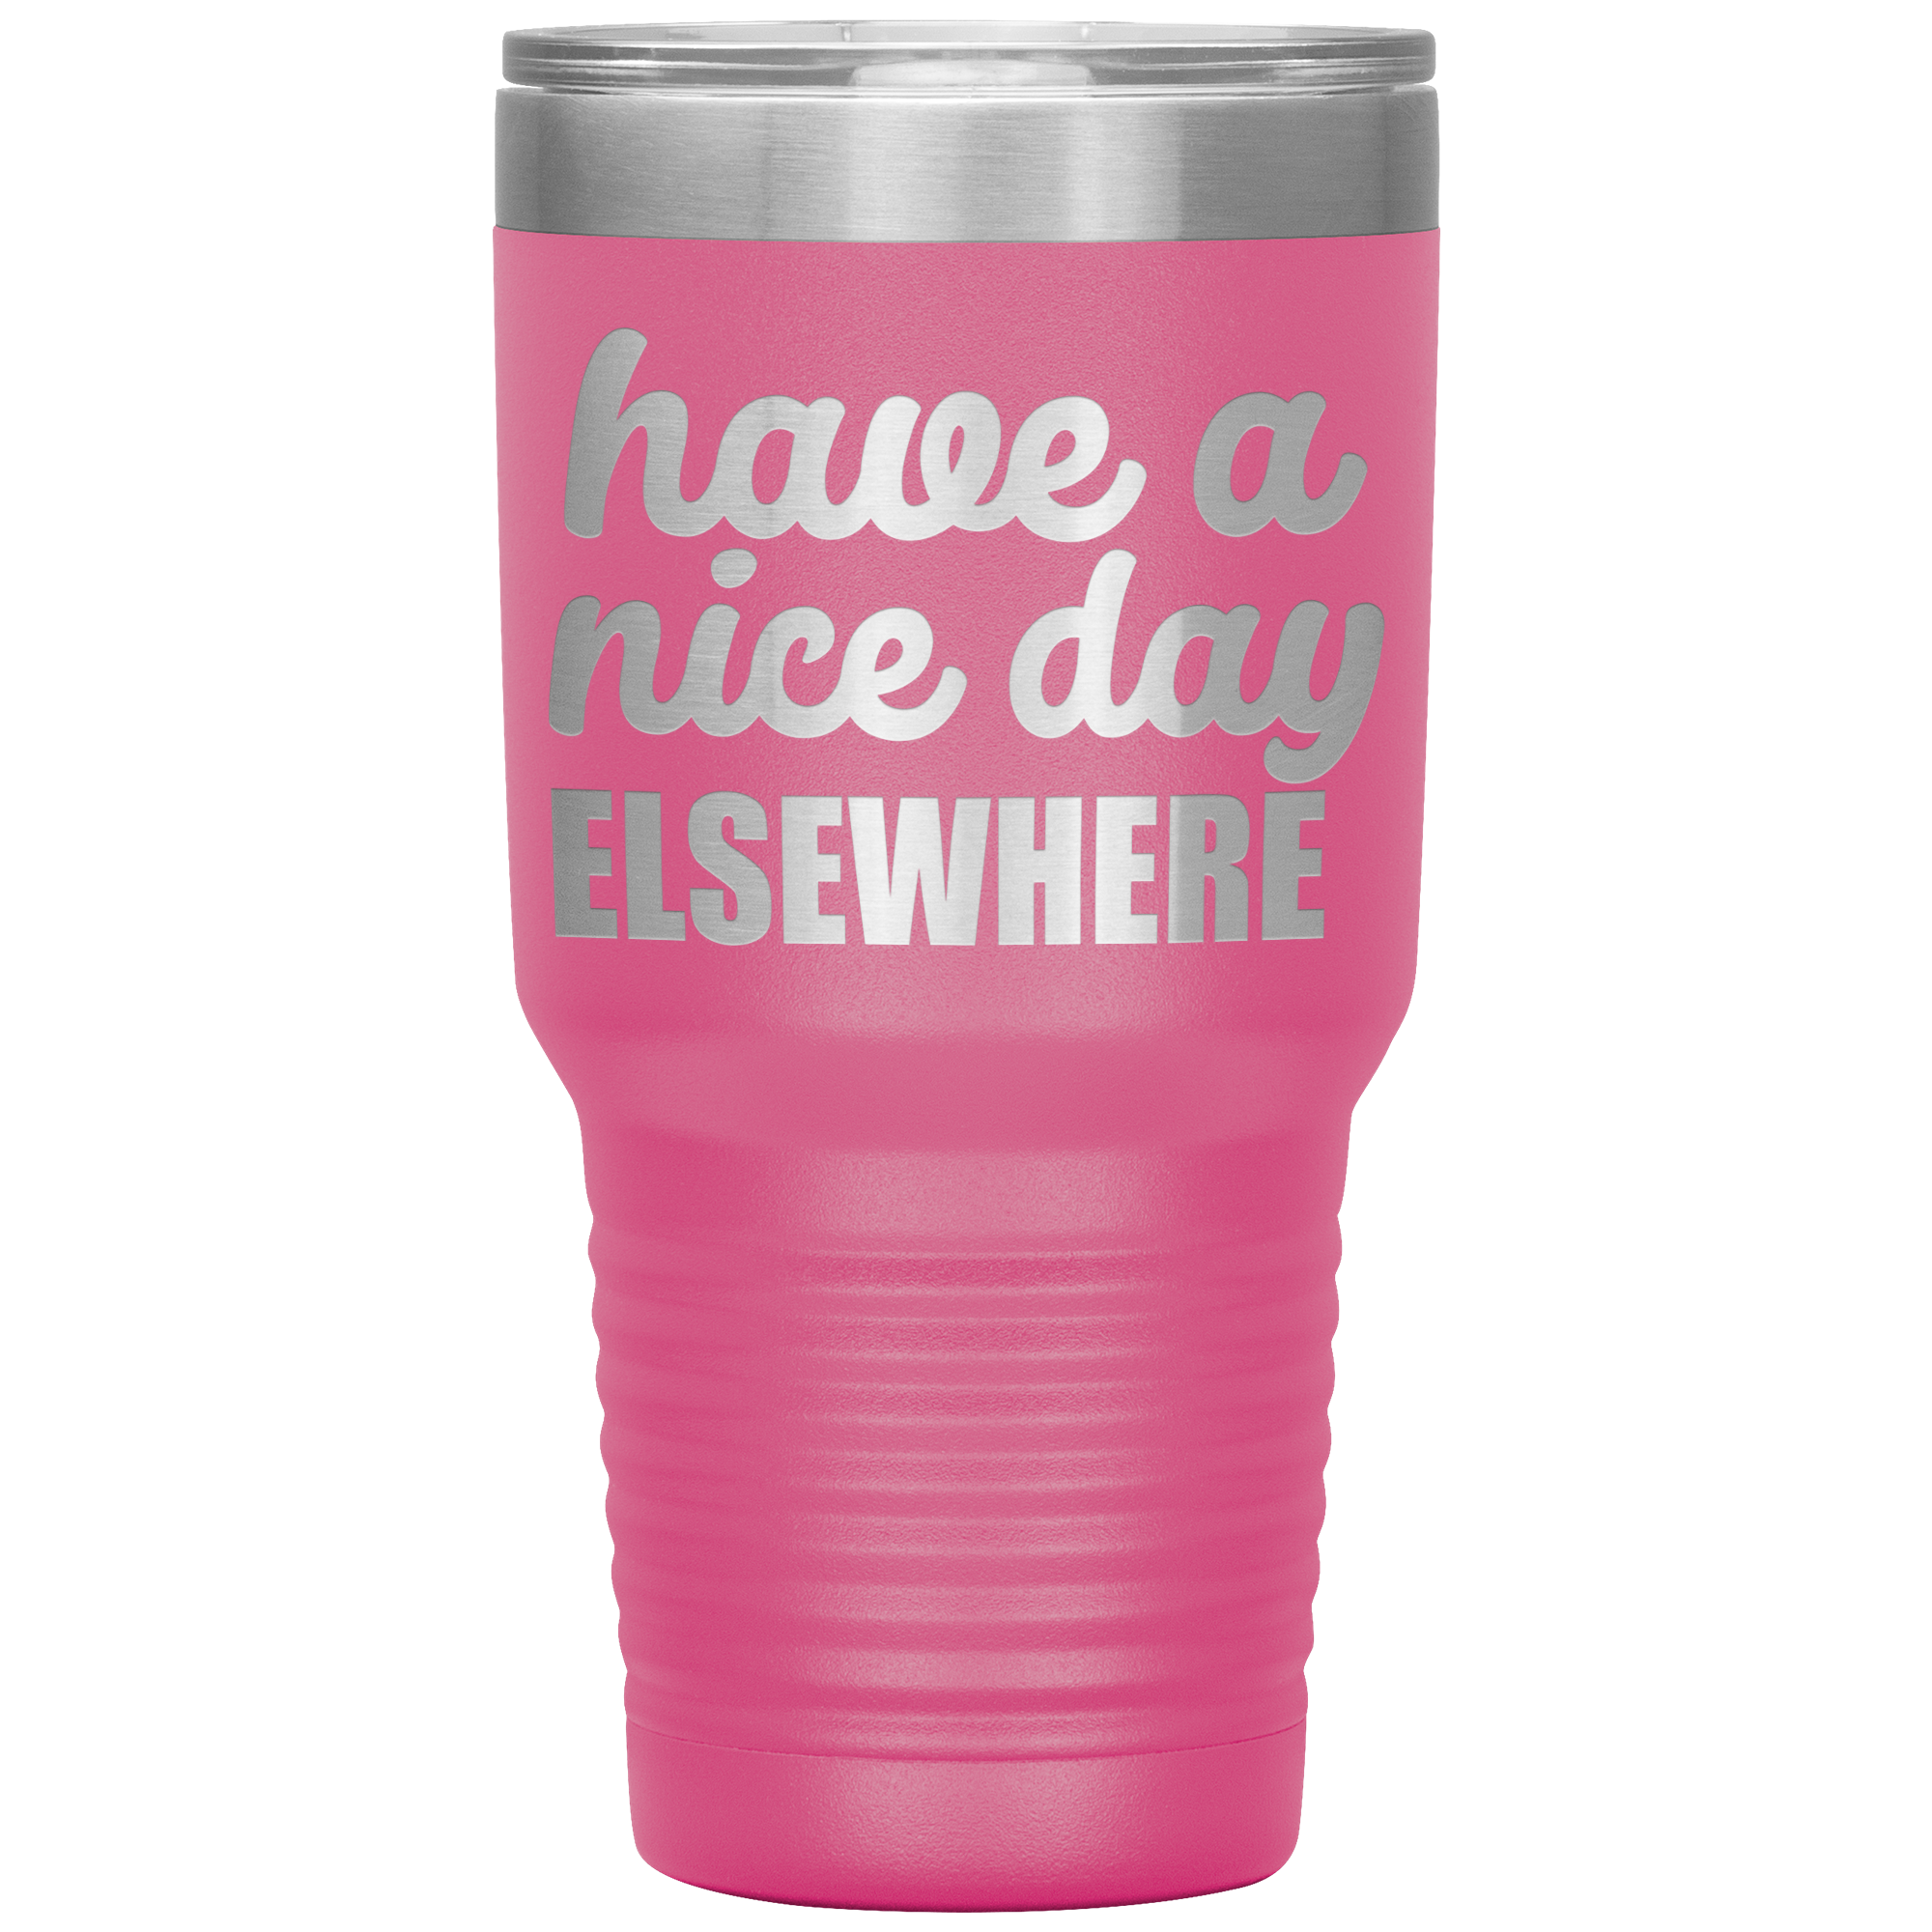 " HAVE A NICE DAY ELSEWHERE " TUMBLER